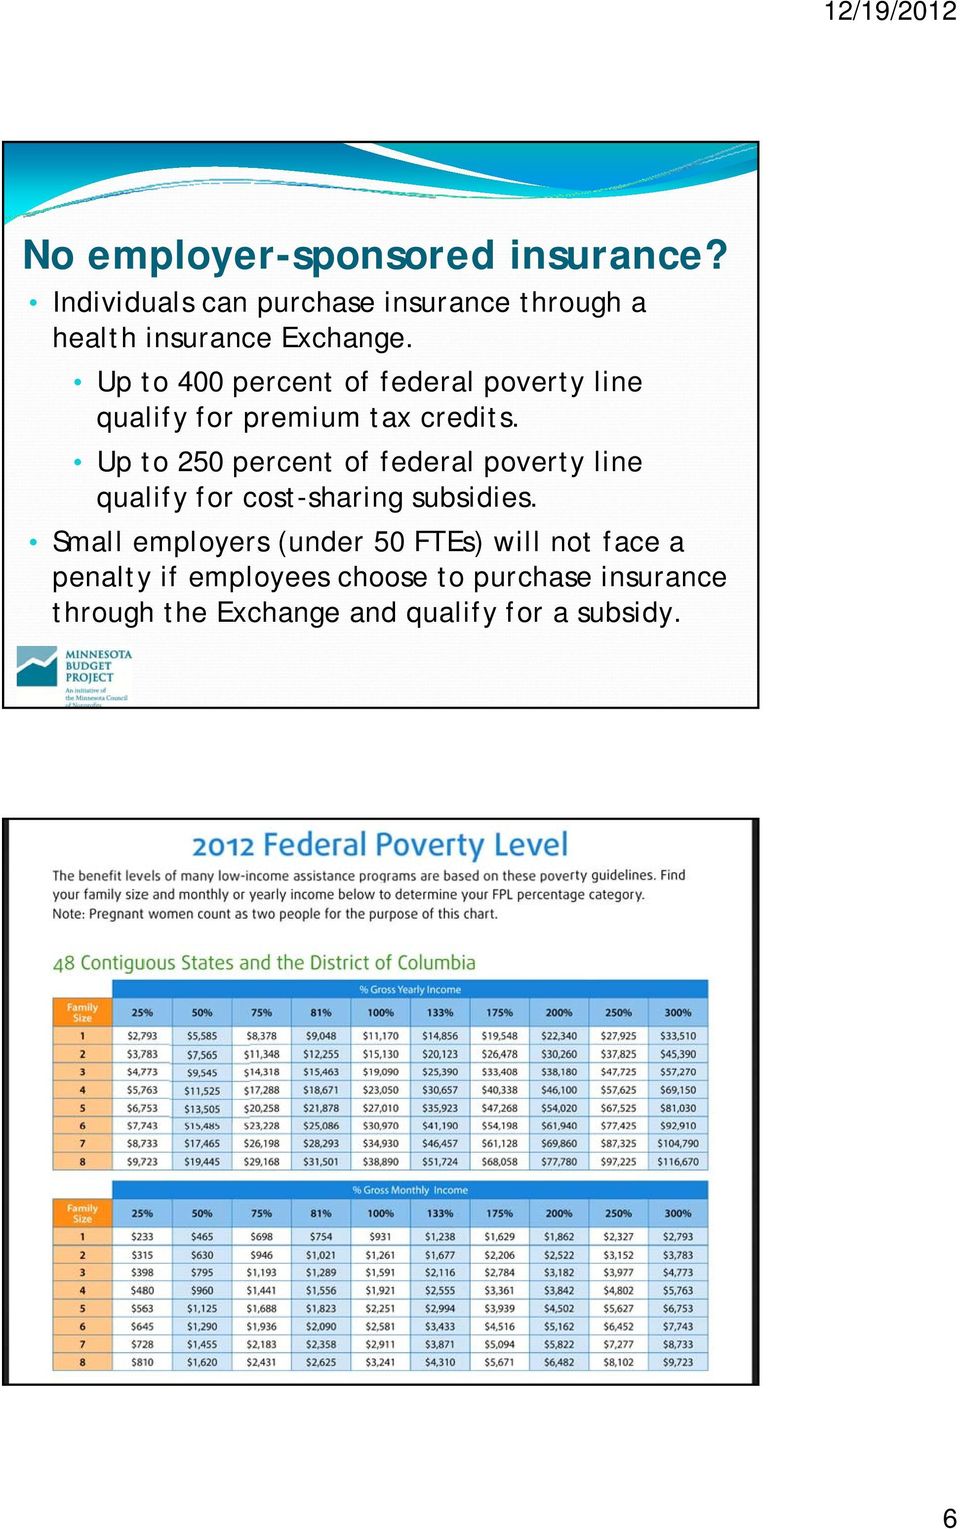 Up to 400 percent of federal poverty line qualify for premium tax credits.